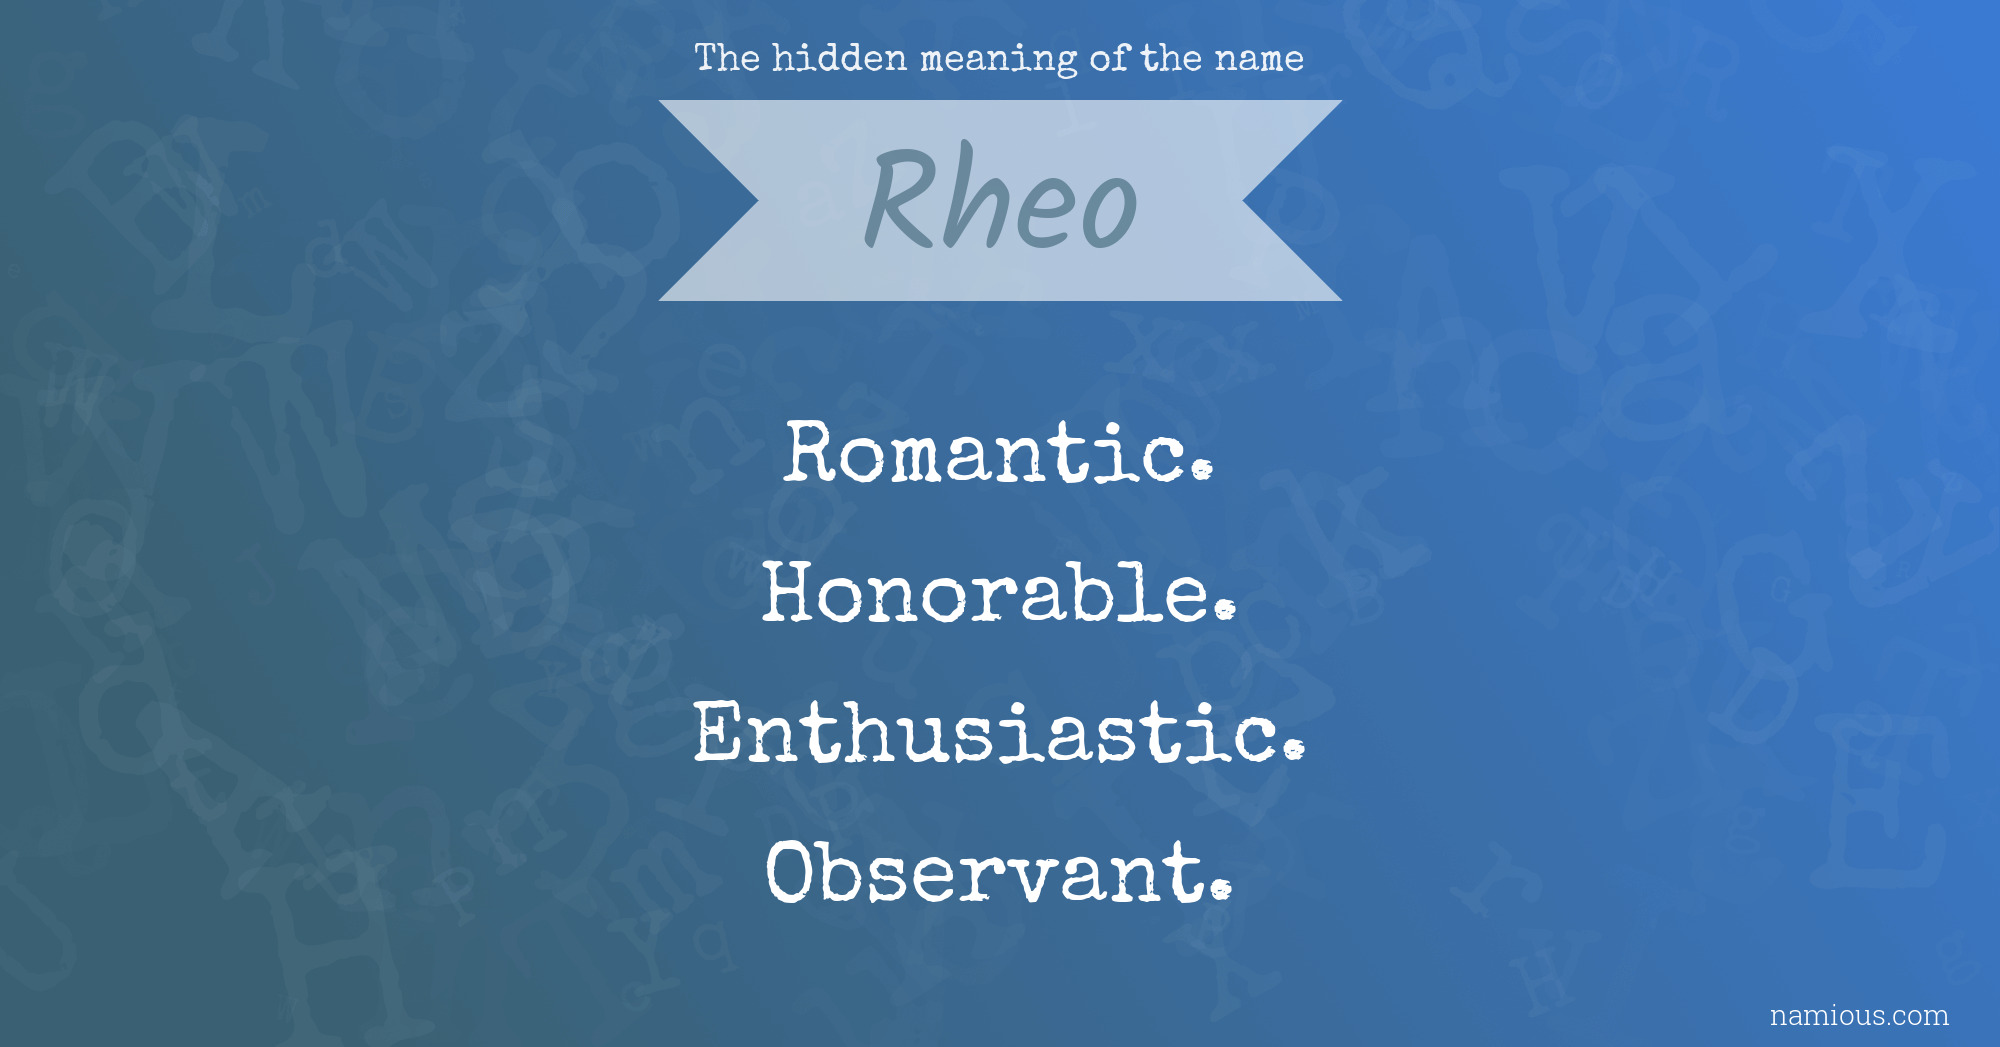 The hidden meaning of the name Rheo